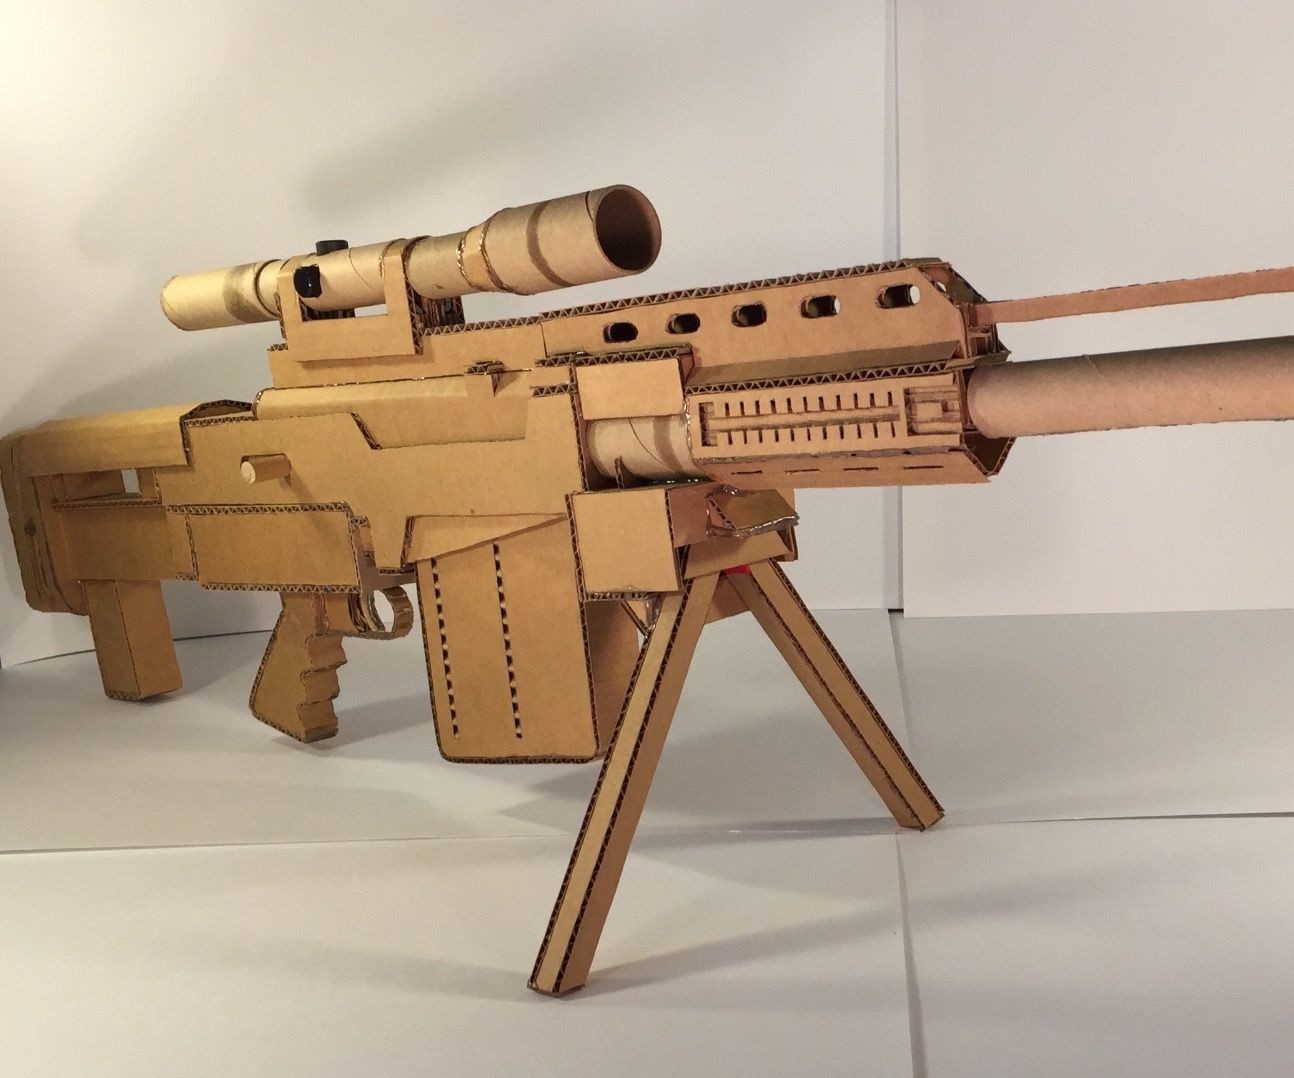 papercraft-pistol-fully-functioning-cardboard-as-50-sniper-rifle-printable-papercrafts